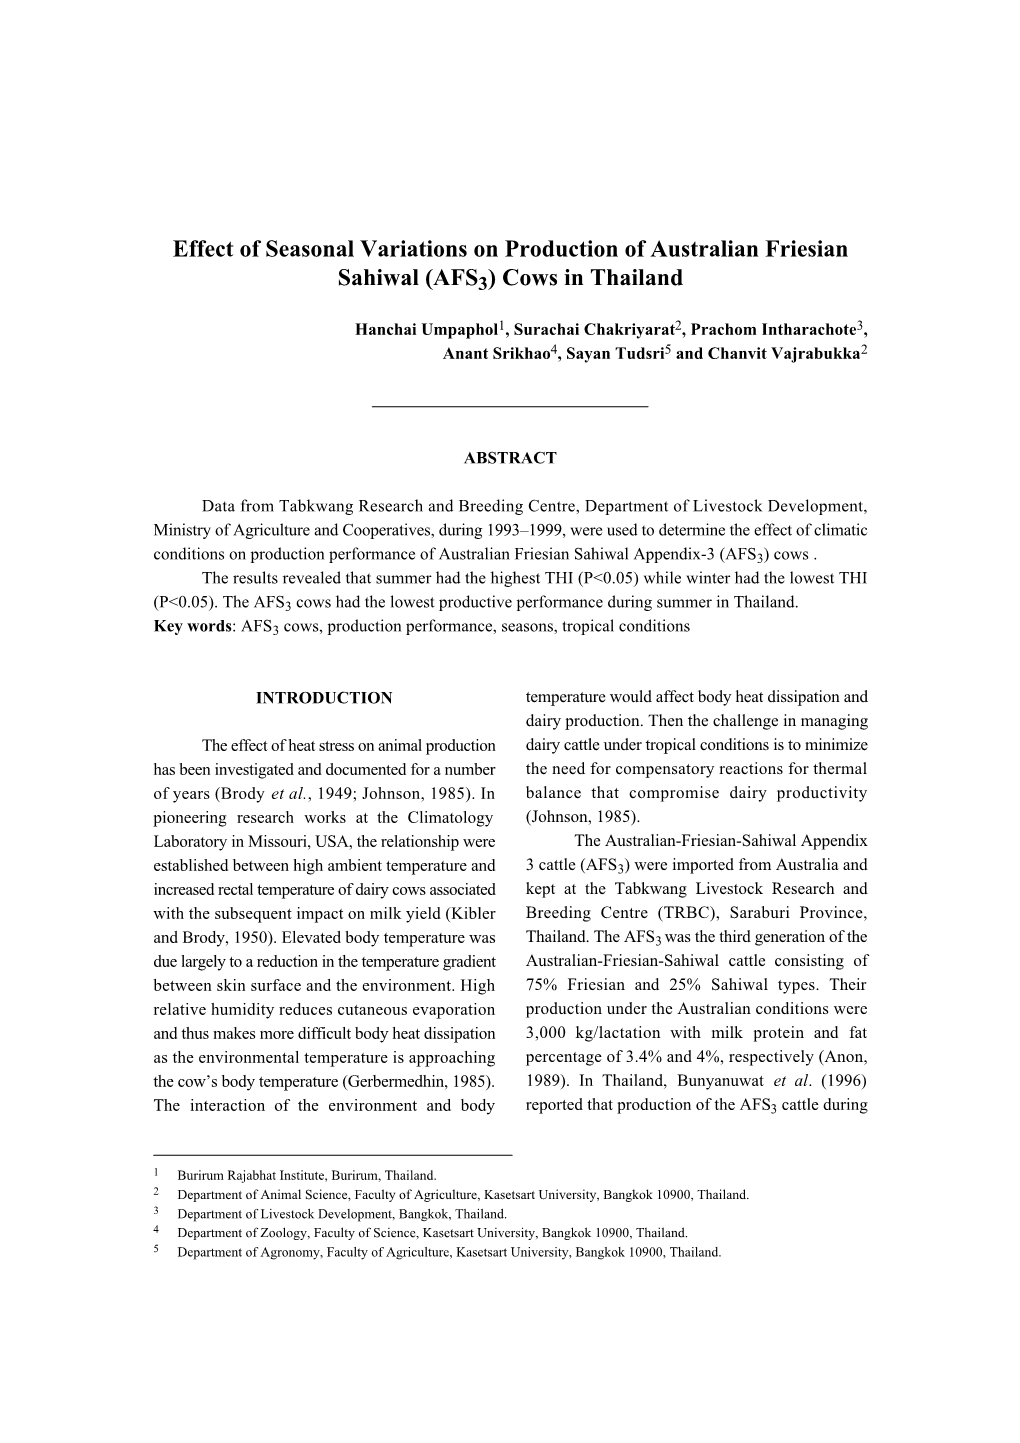 Effect of Seasonal Variations on Production of Australian Friesian Sahiwal (AFS3) Cows in Thailand